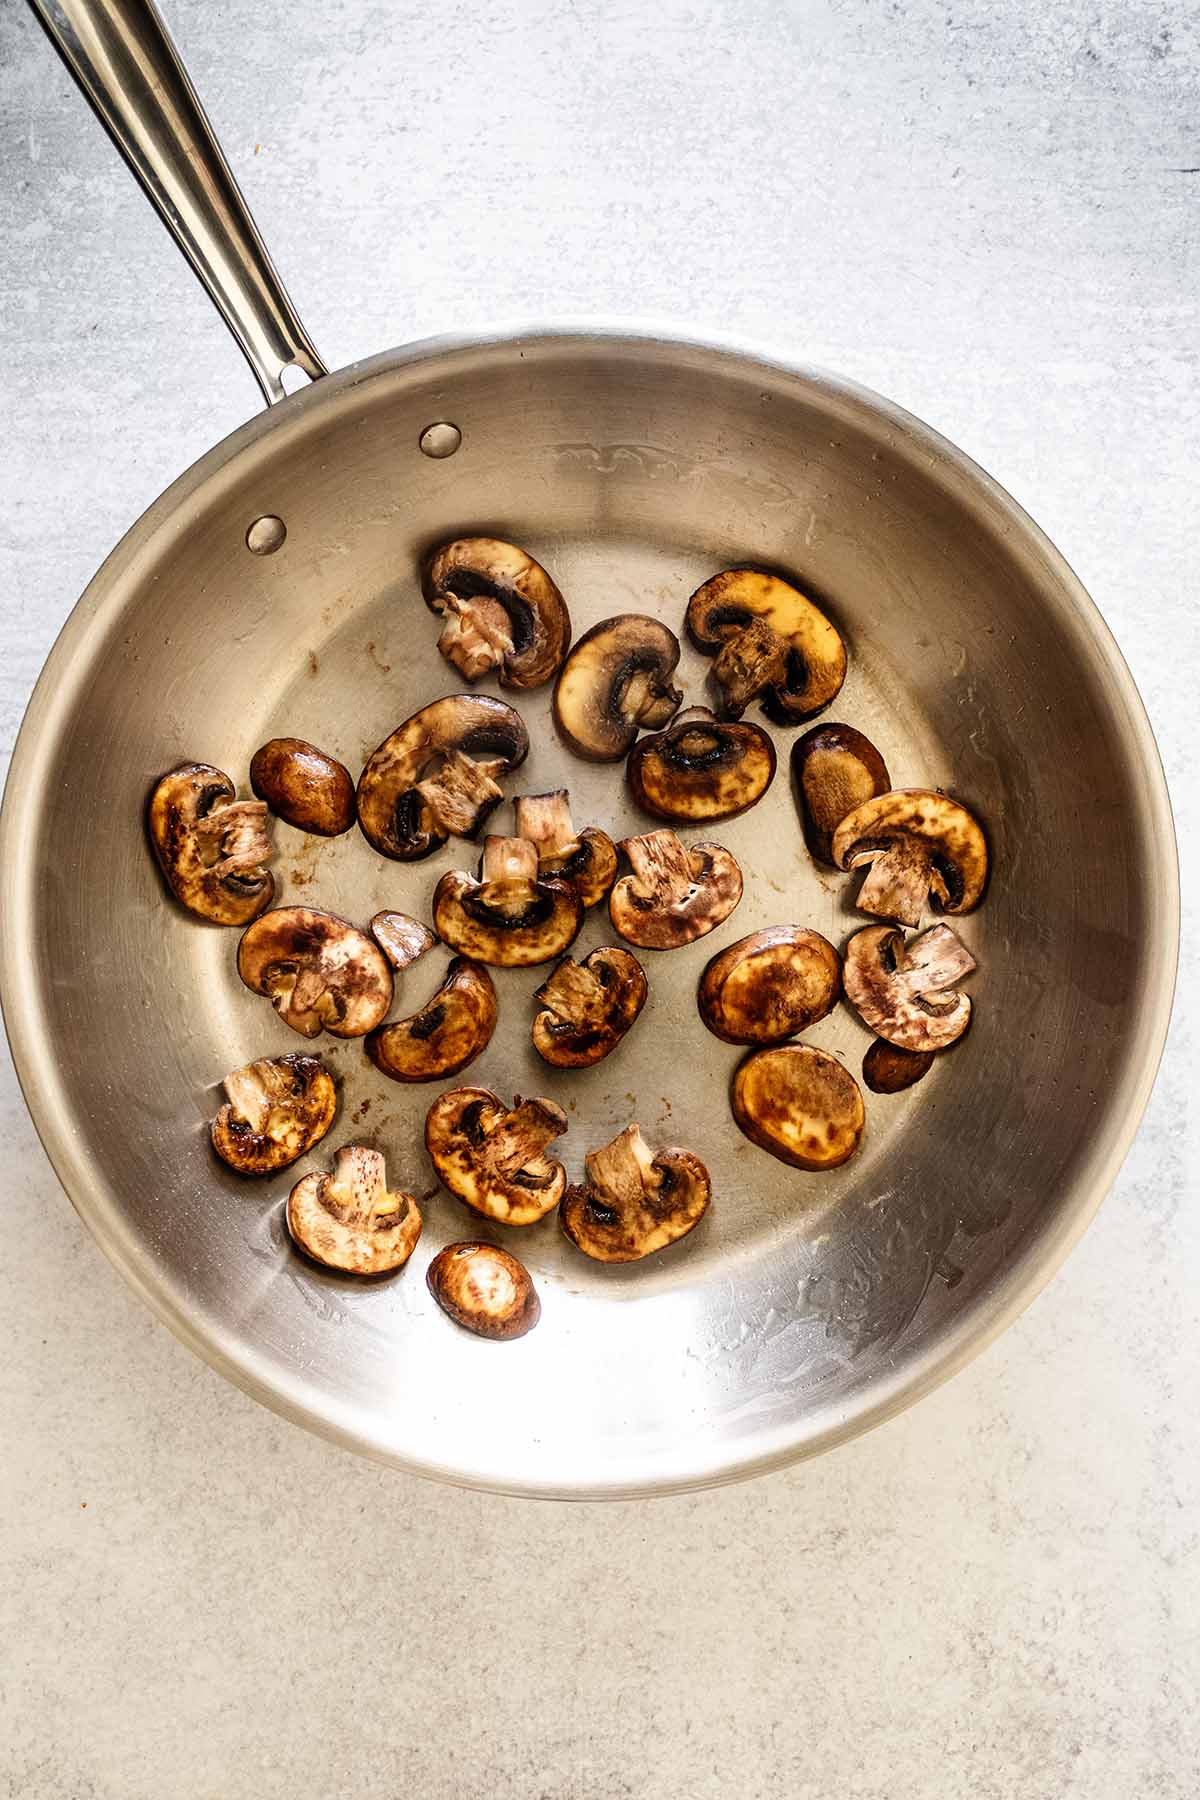 Cooked sliced ​​mushrooms in a stainless steel skillet.